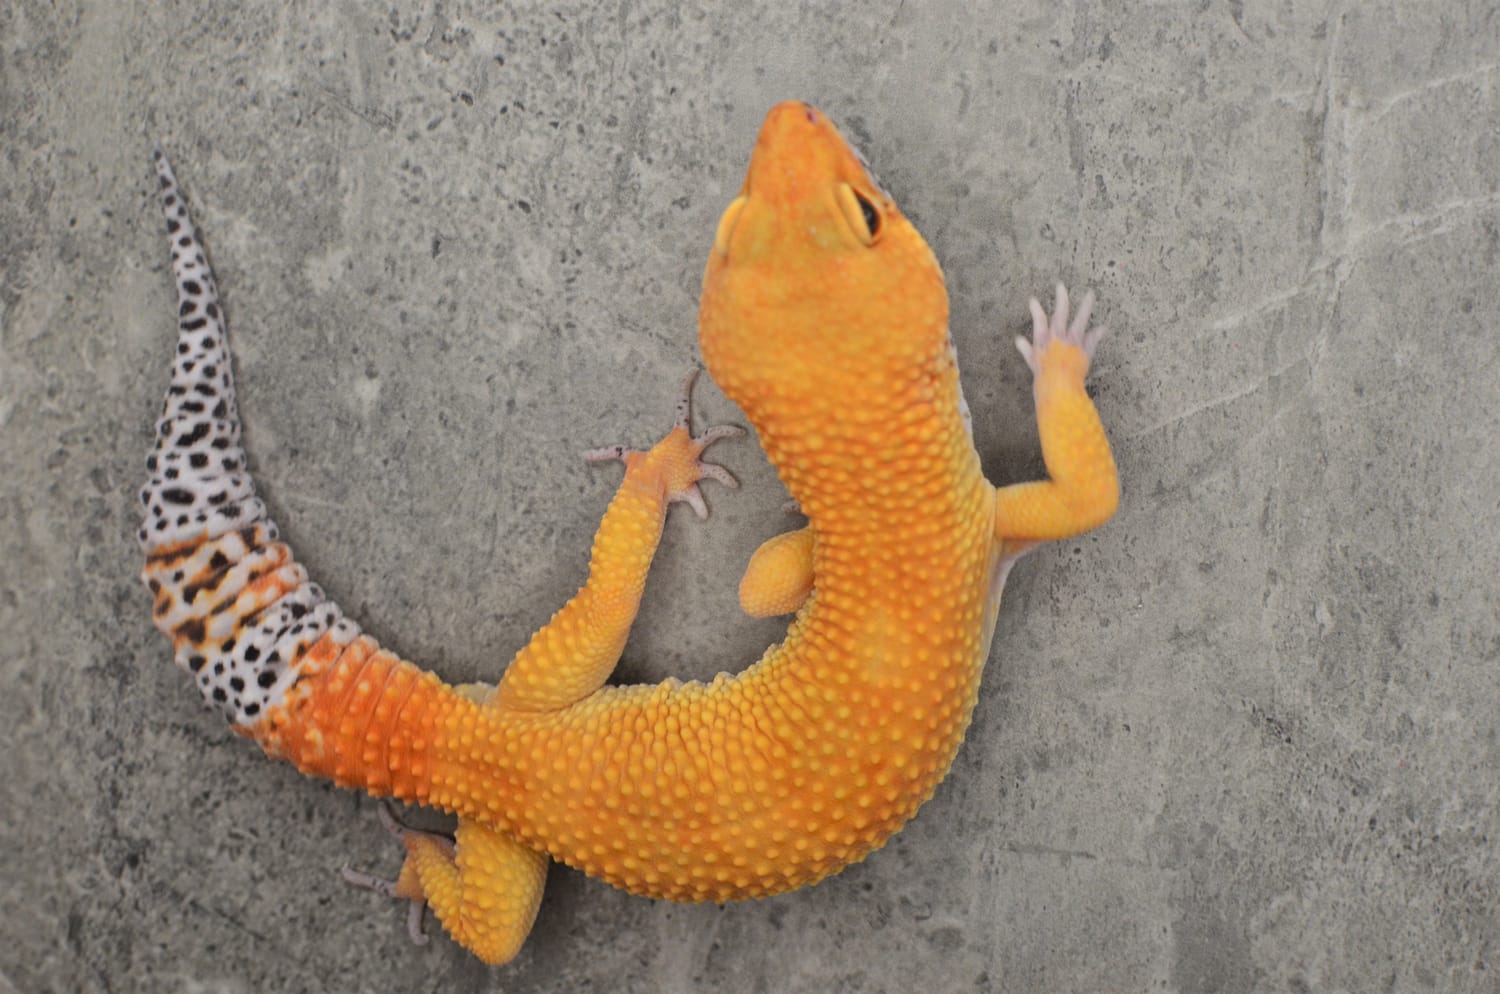 Tango Crush Leopard Gecko by Ed's Bright and Strong Geckos